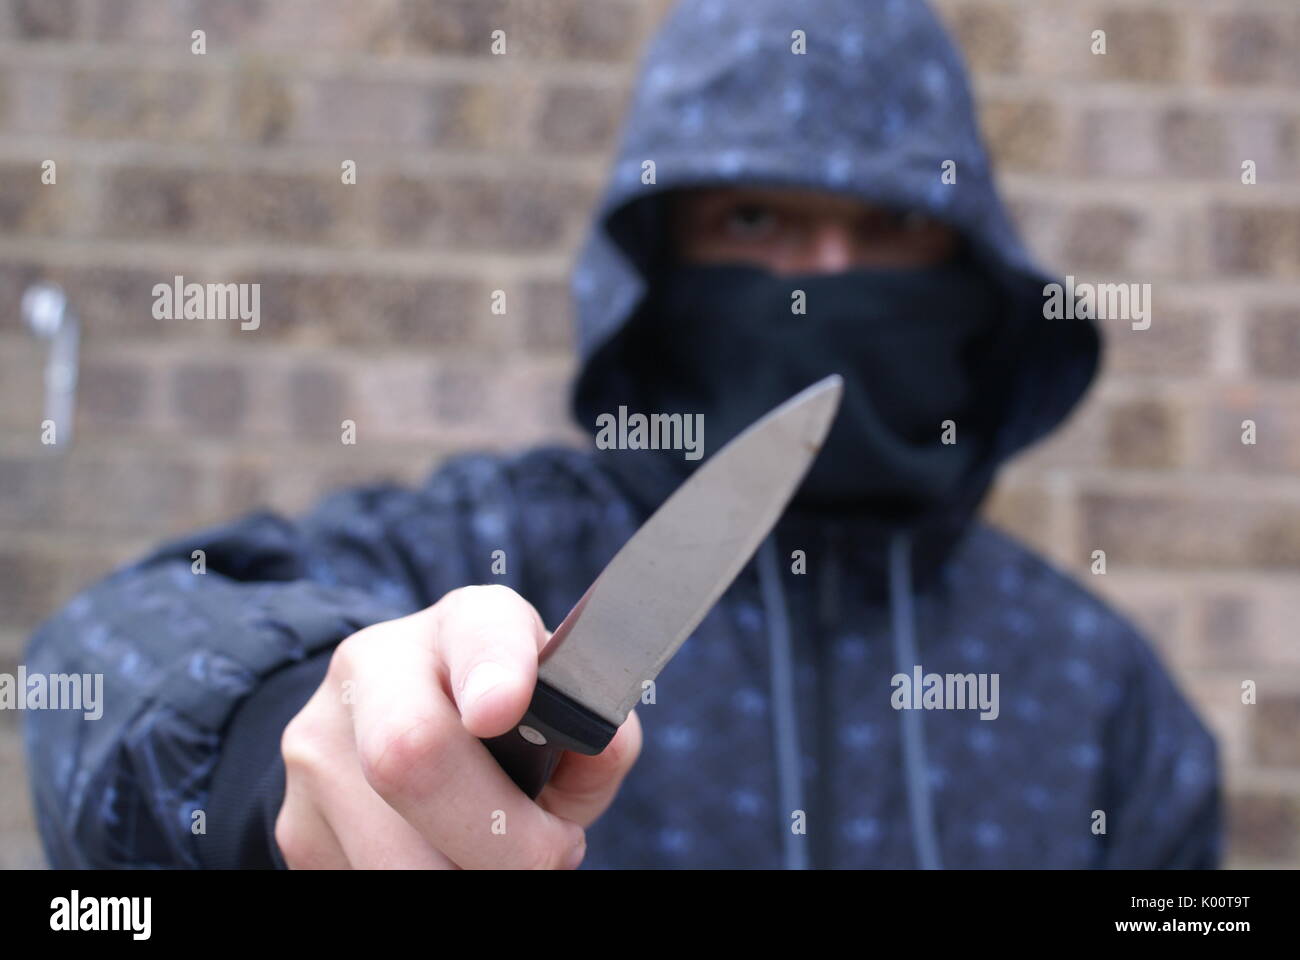 knife crime, teenagers carrying knives, murder Stock Photo